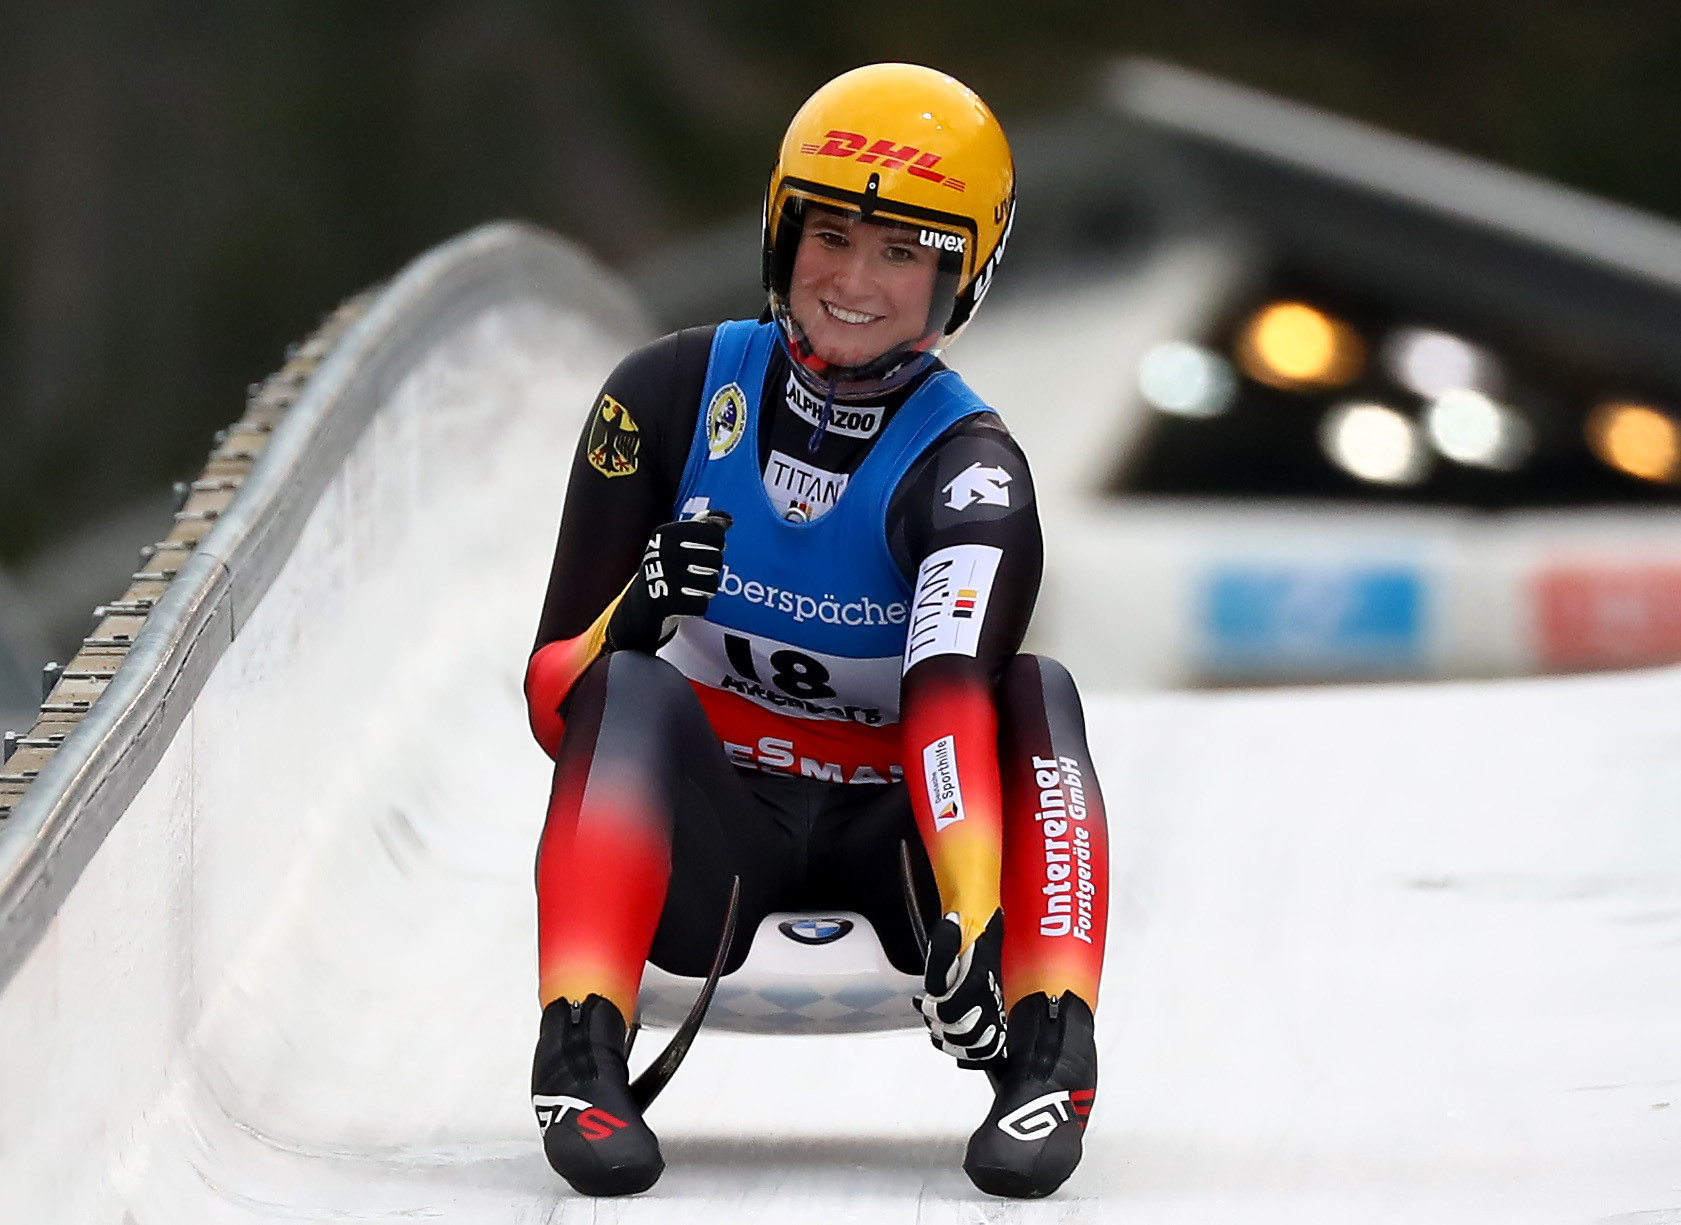 Natalie Geisenberger secured the 50th World Cup win of her career ©Getty Images